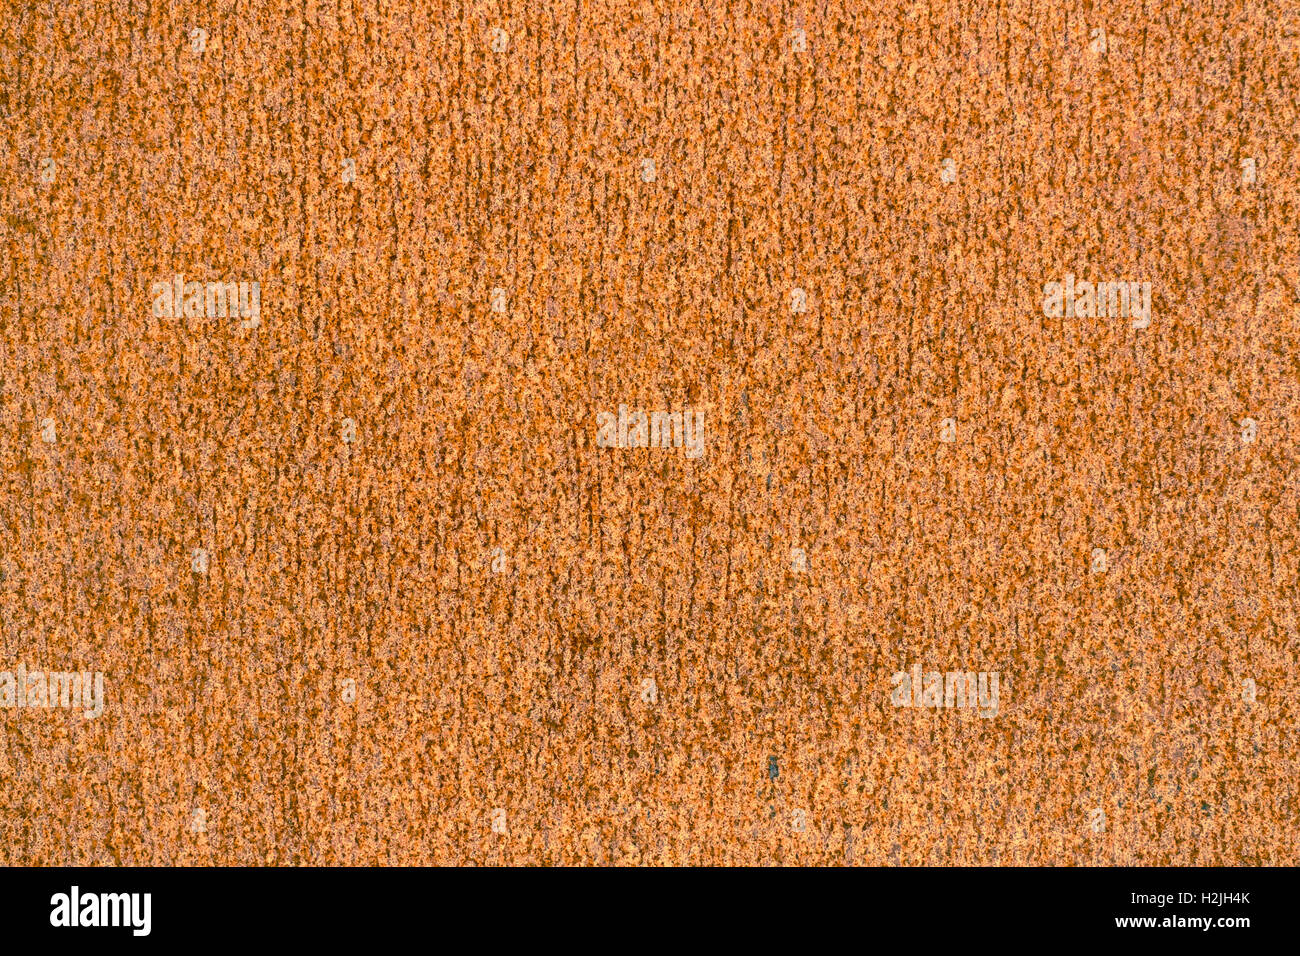 Rusted iron surface Stock Photo